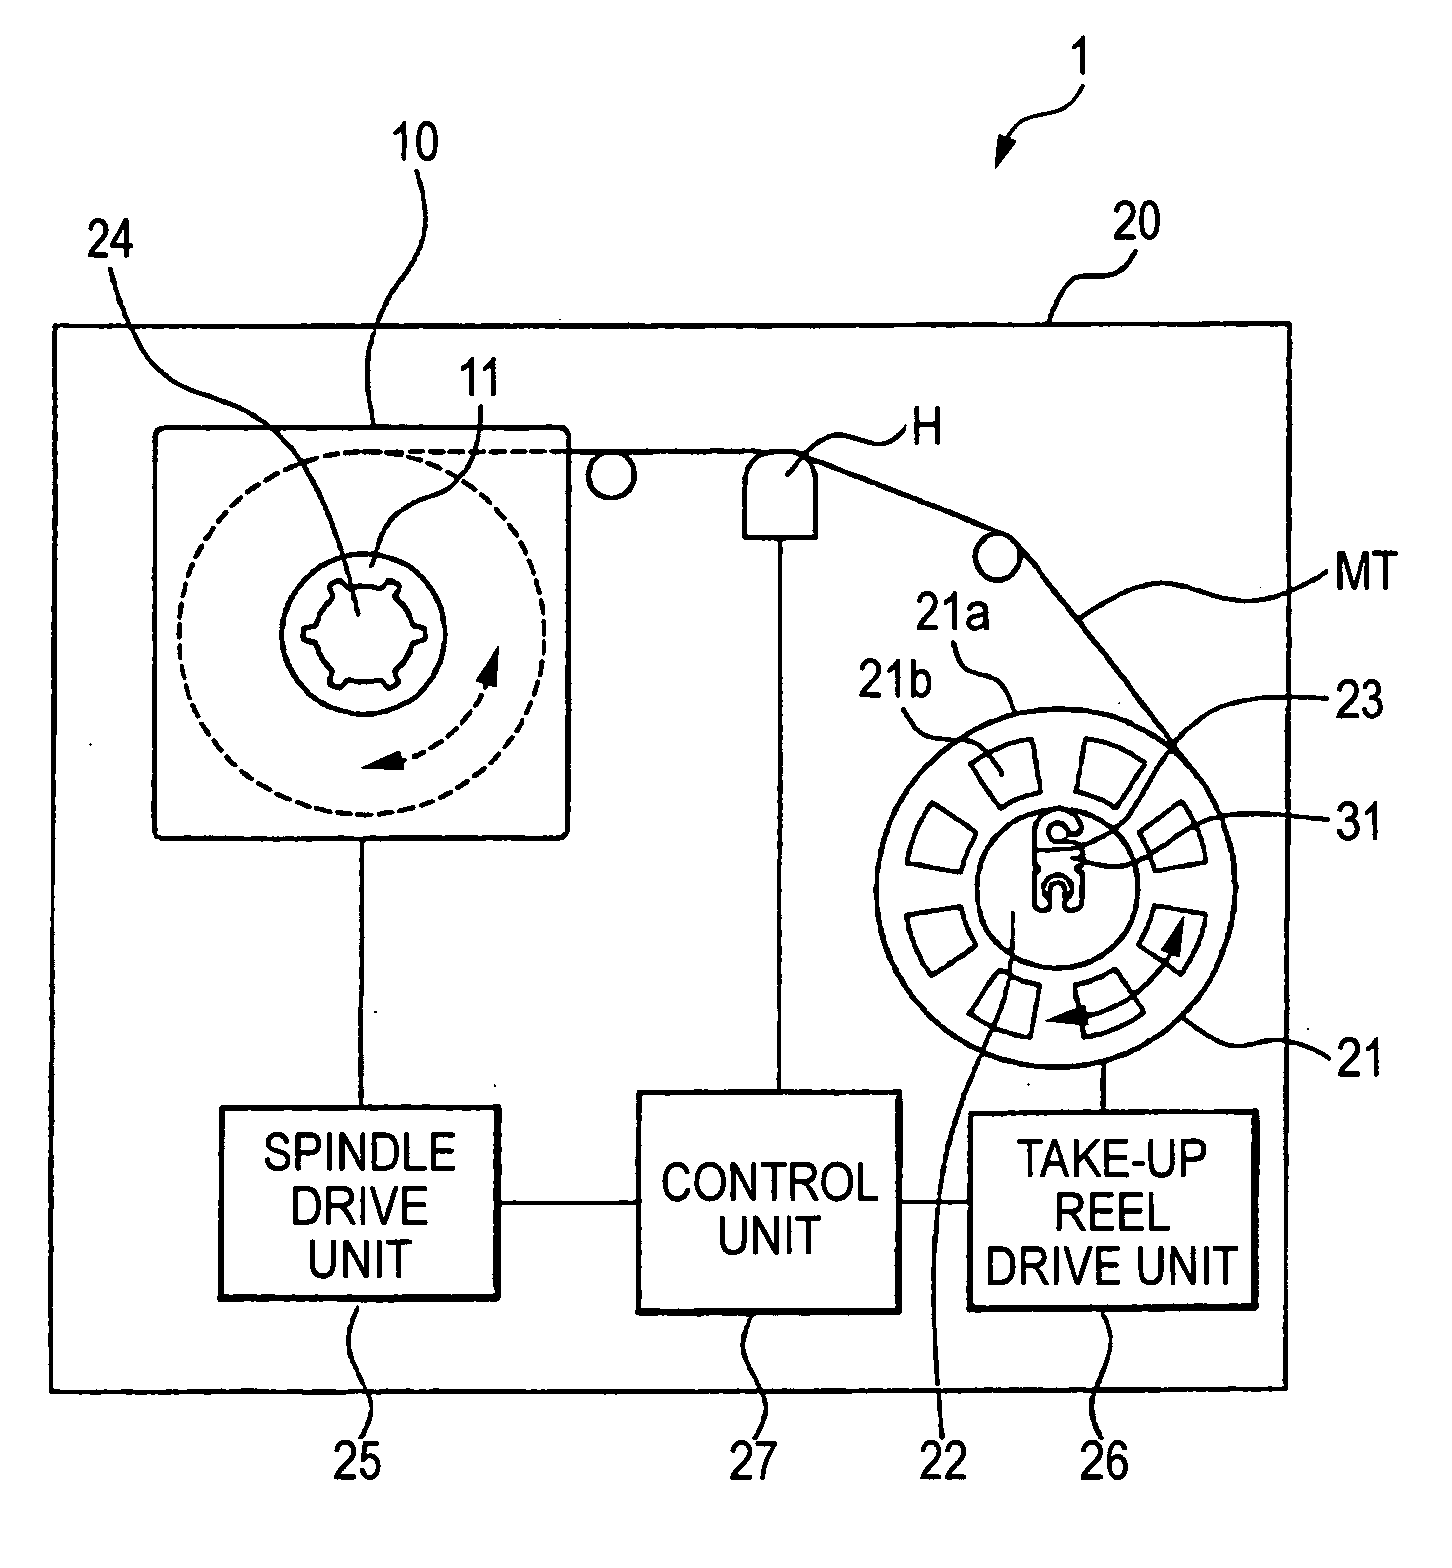 Leader Tape and Magnetic Tape Cartridge Using the Same